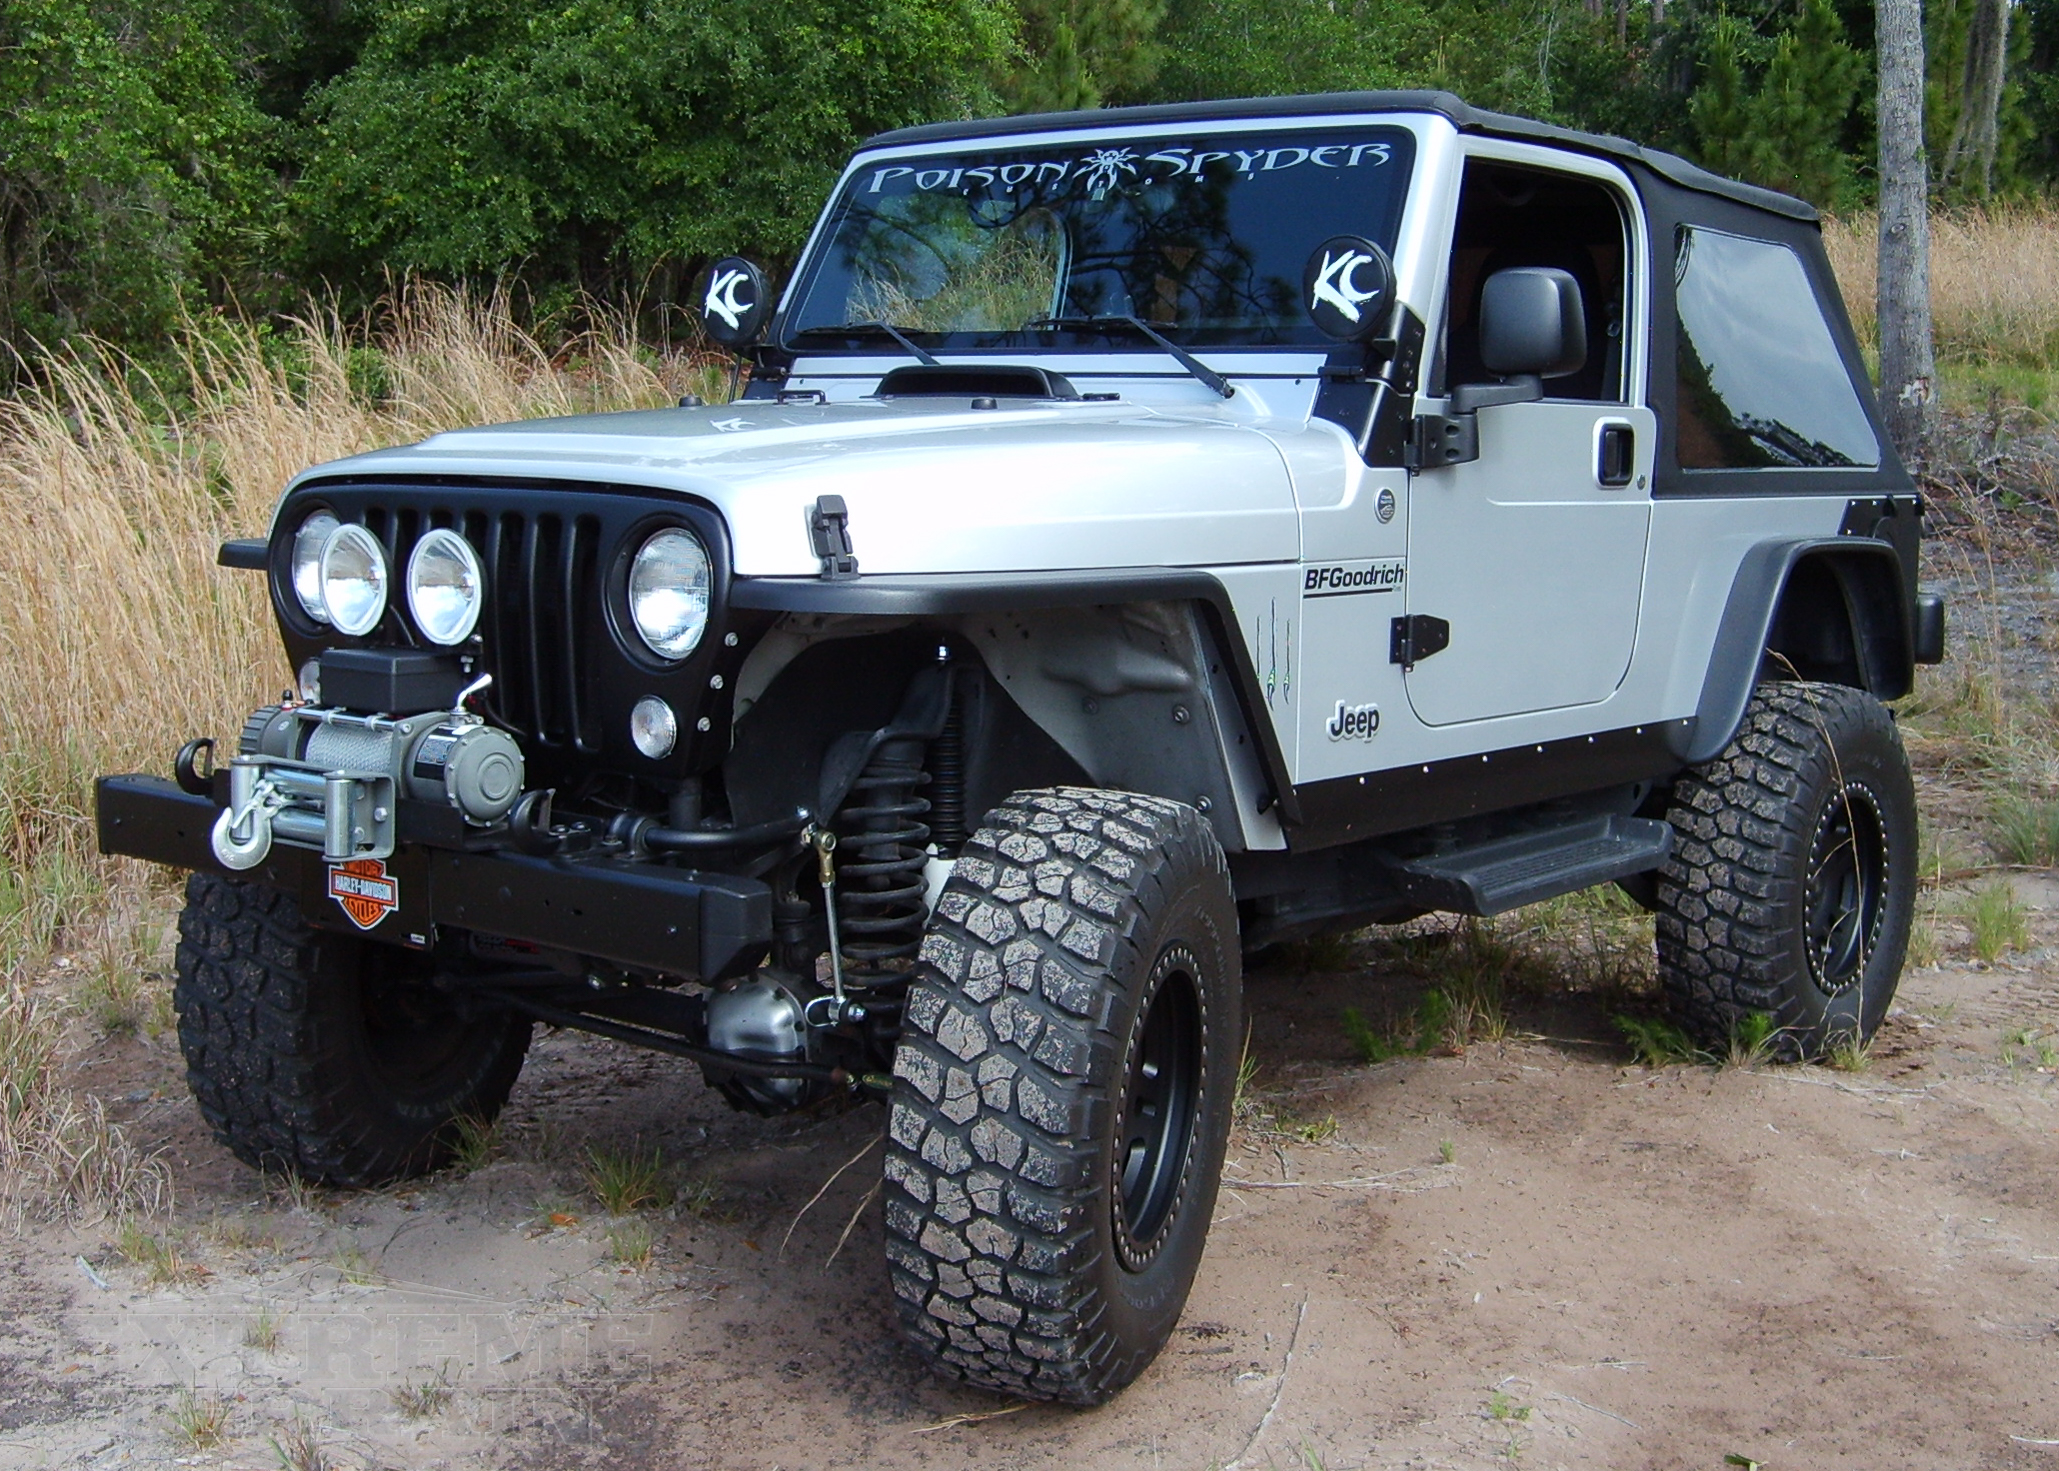 2006 TJ Wrangler Ready for the Trail